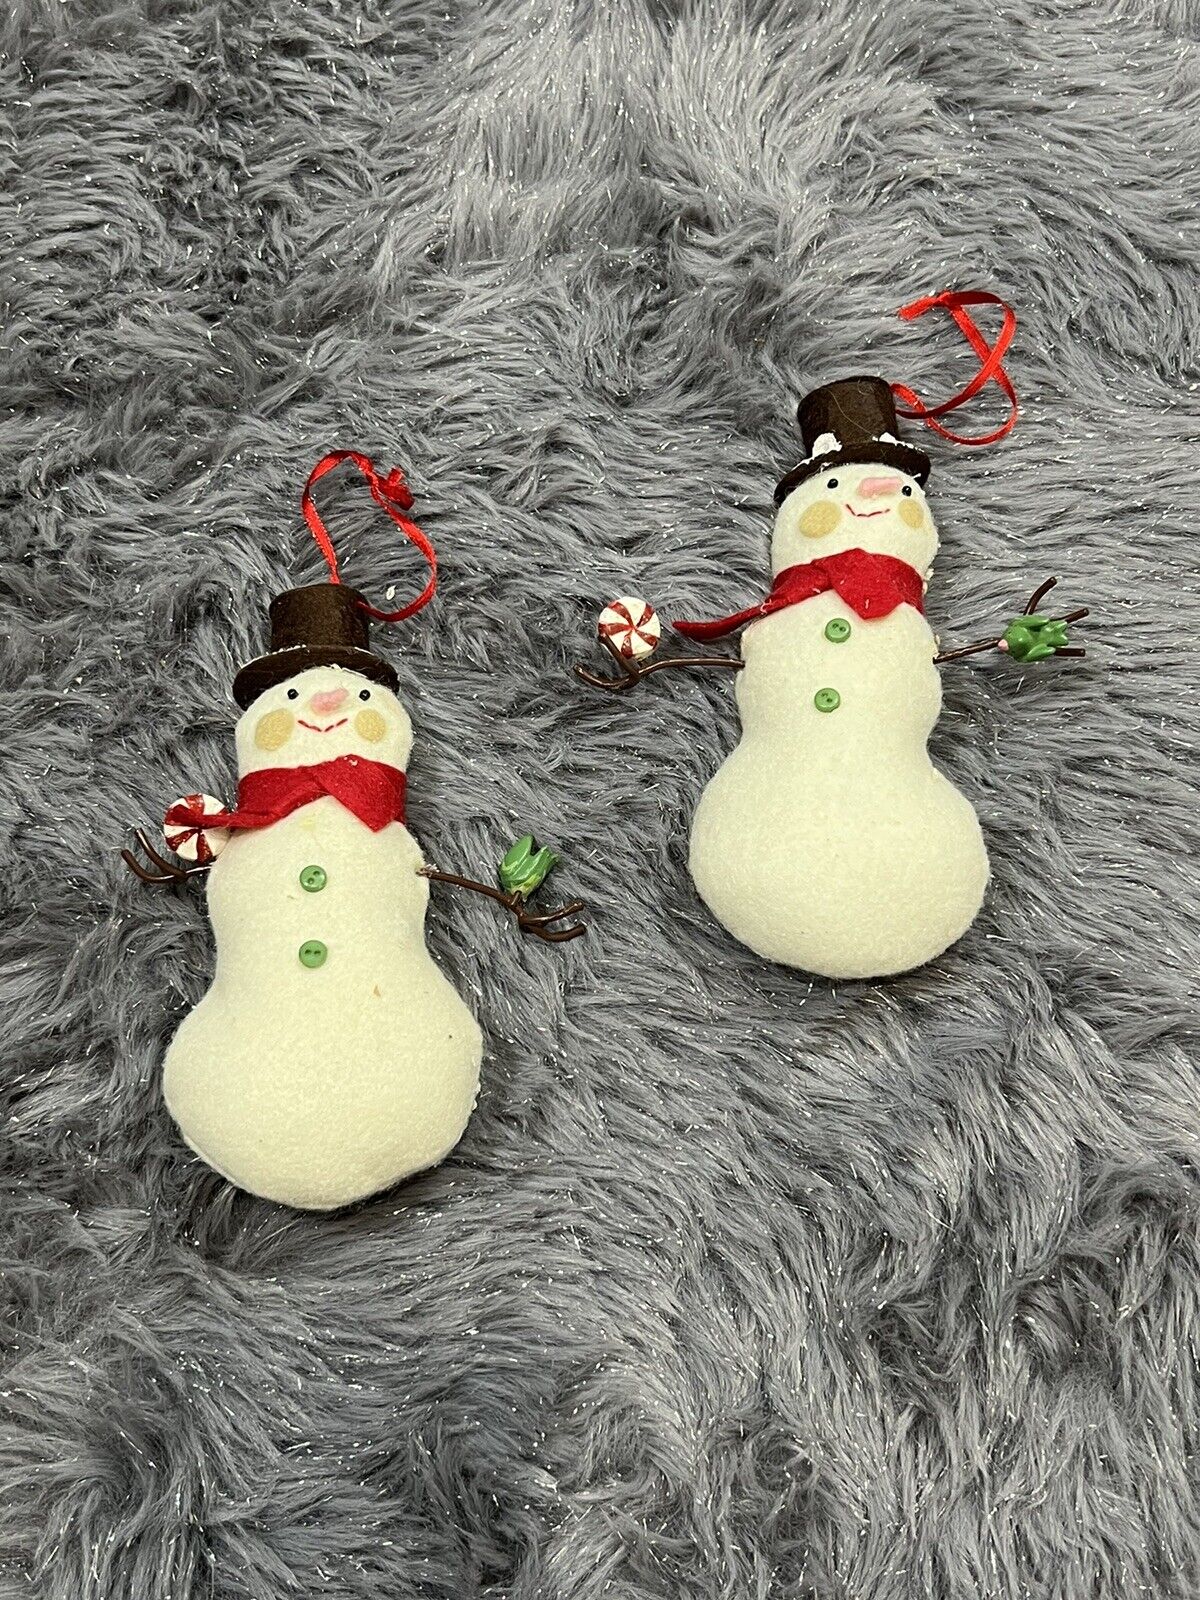 2 Snowman 3x6.5 Inches Christmas Ornament Pre-owned